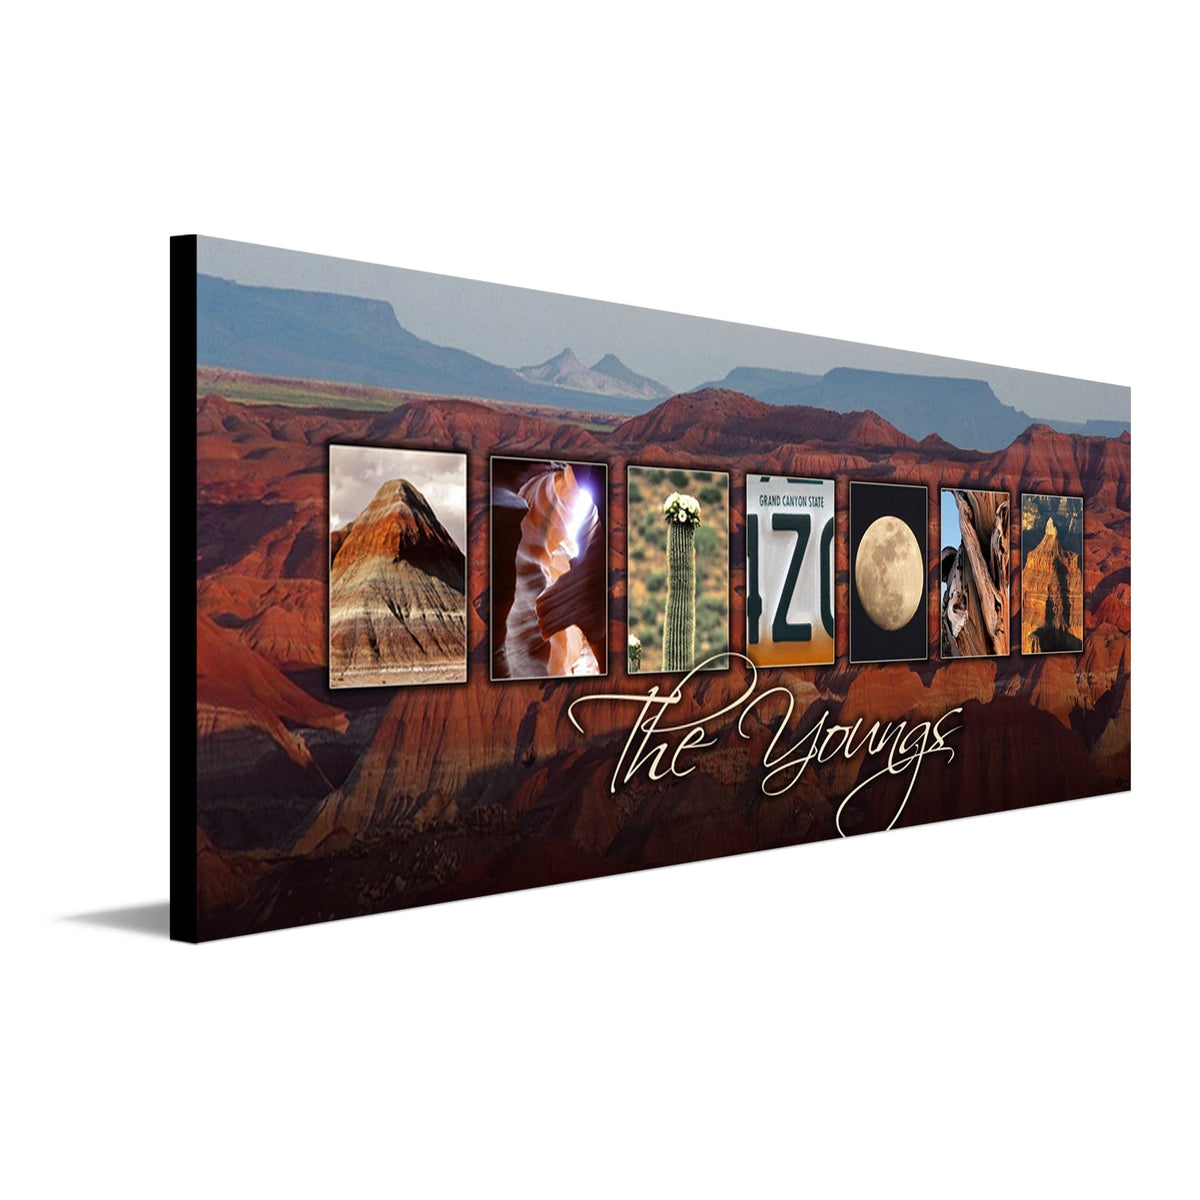 Personalized Arizona art using images of the state to spell your name - Personal-Prints